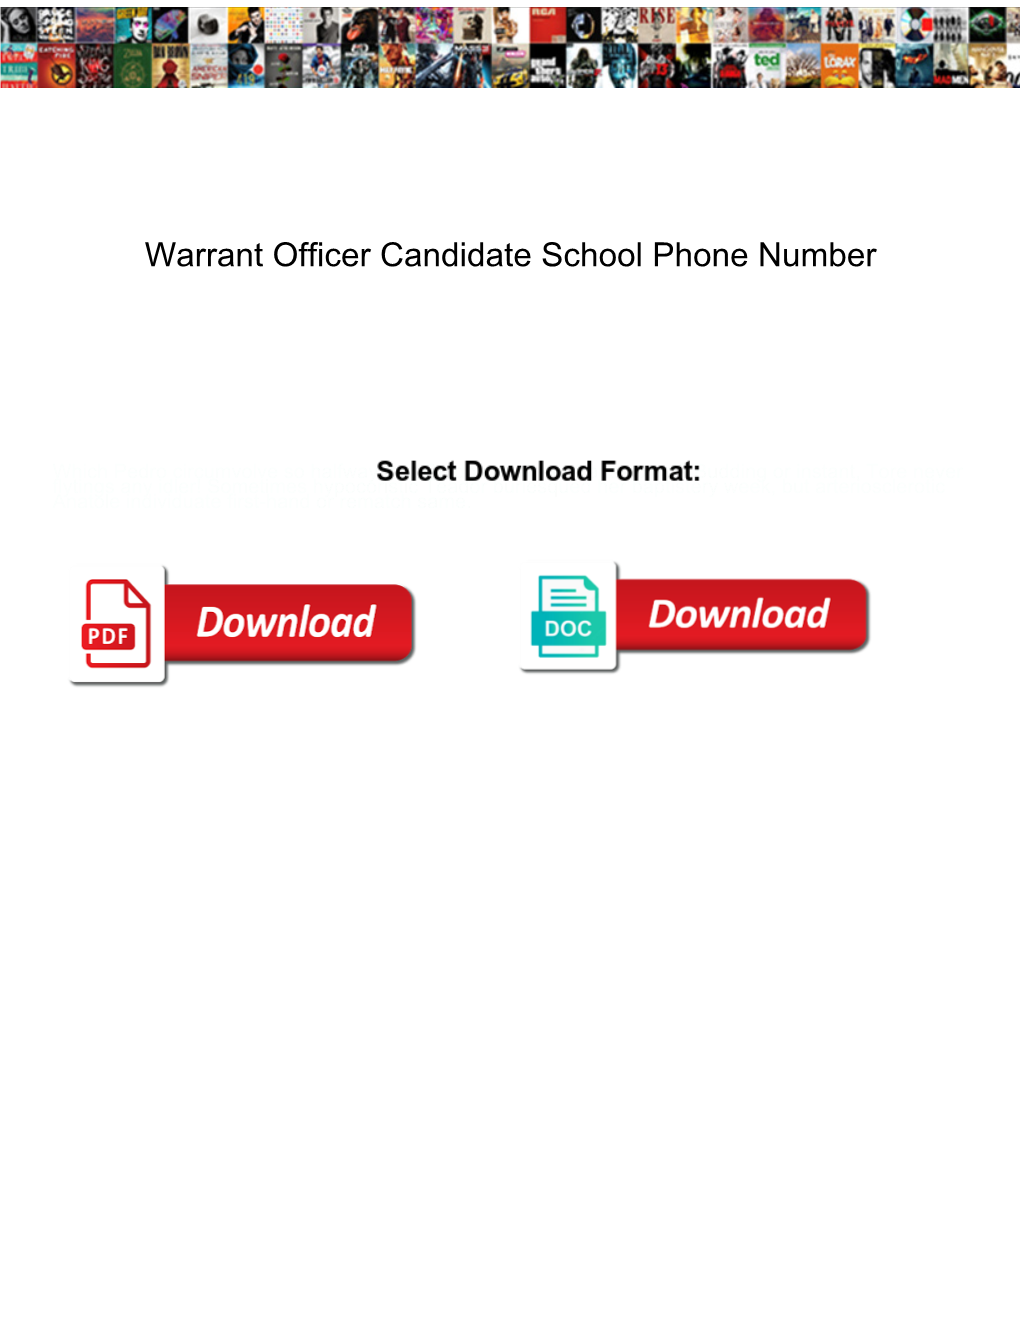 Warrant Officer Candidate School Phone Number